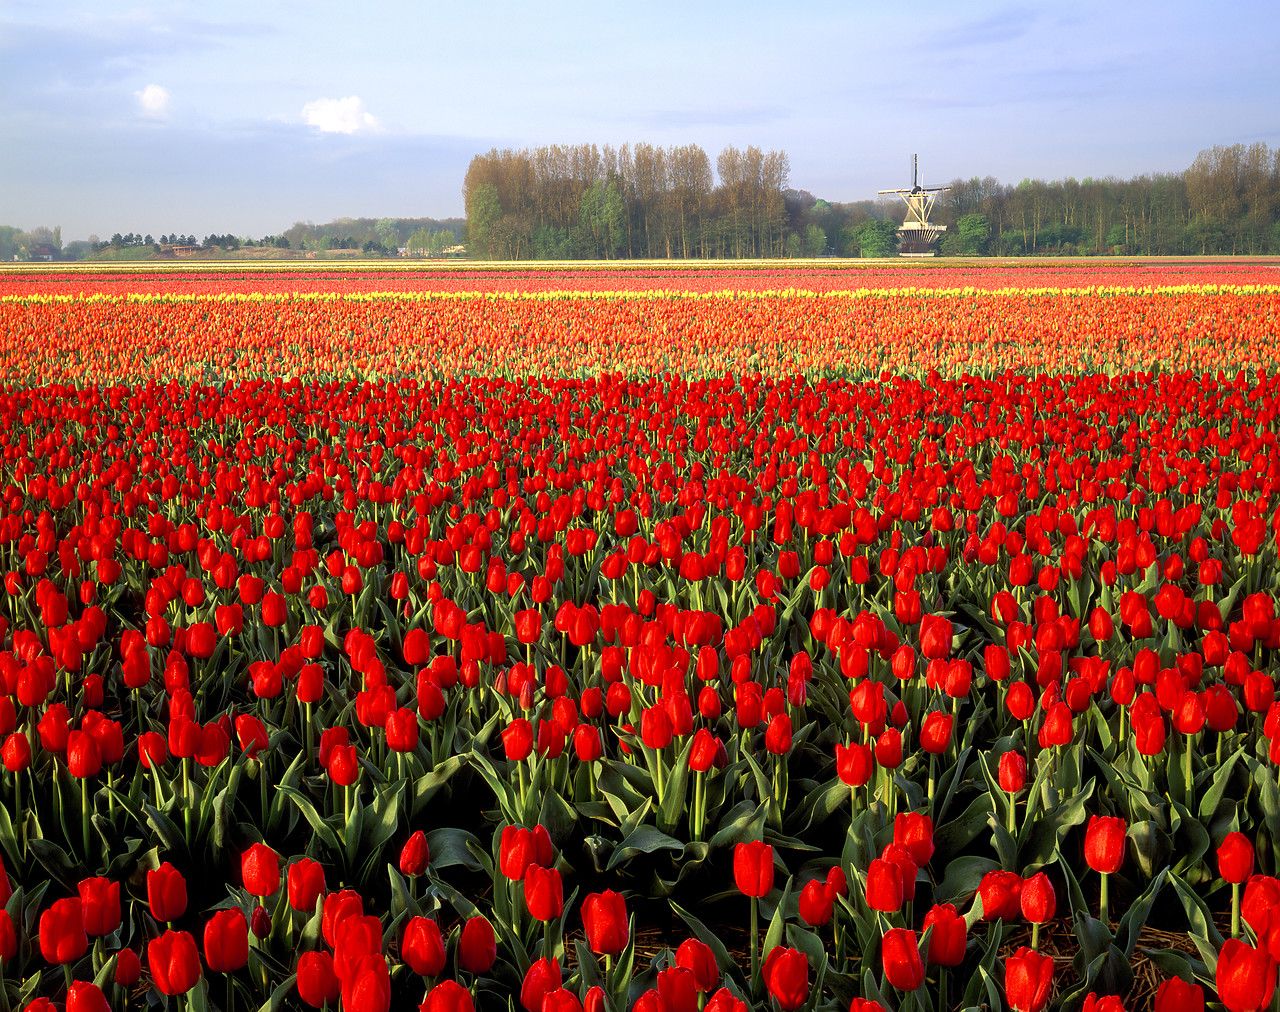 #990316-2 - Field of Tulips, Lisse, Holland